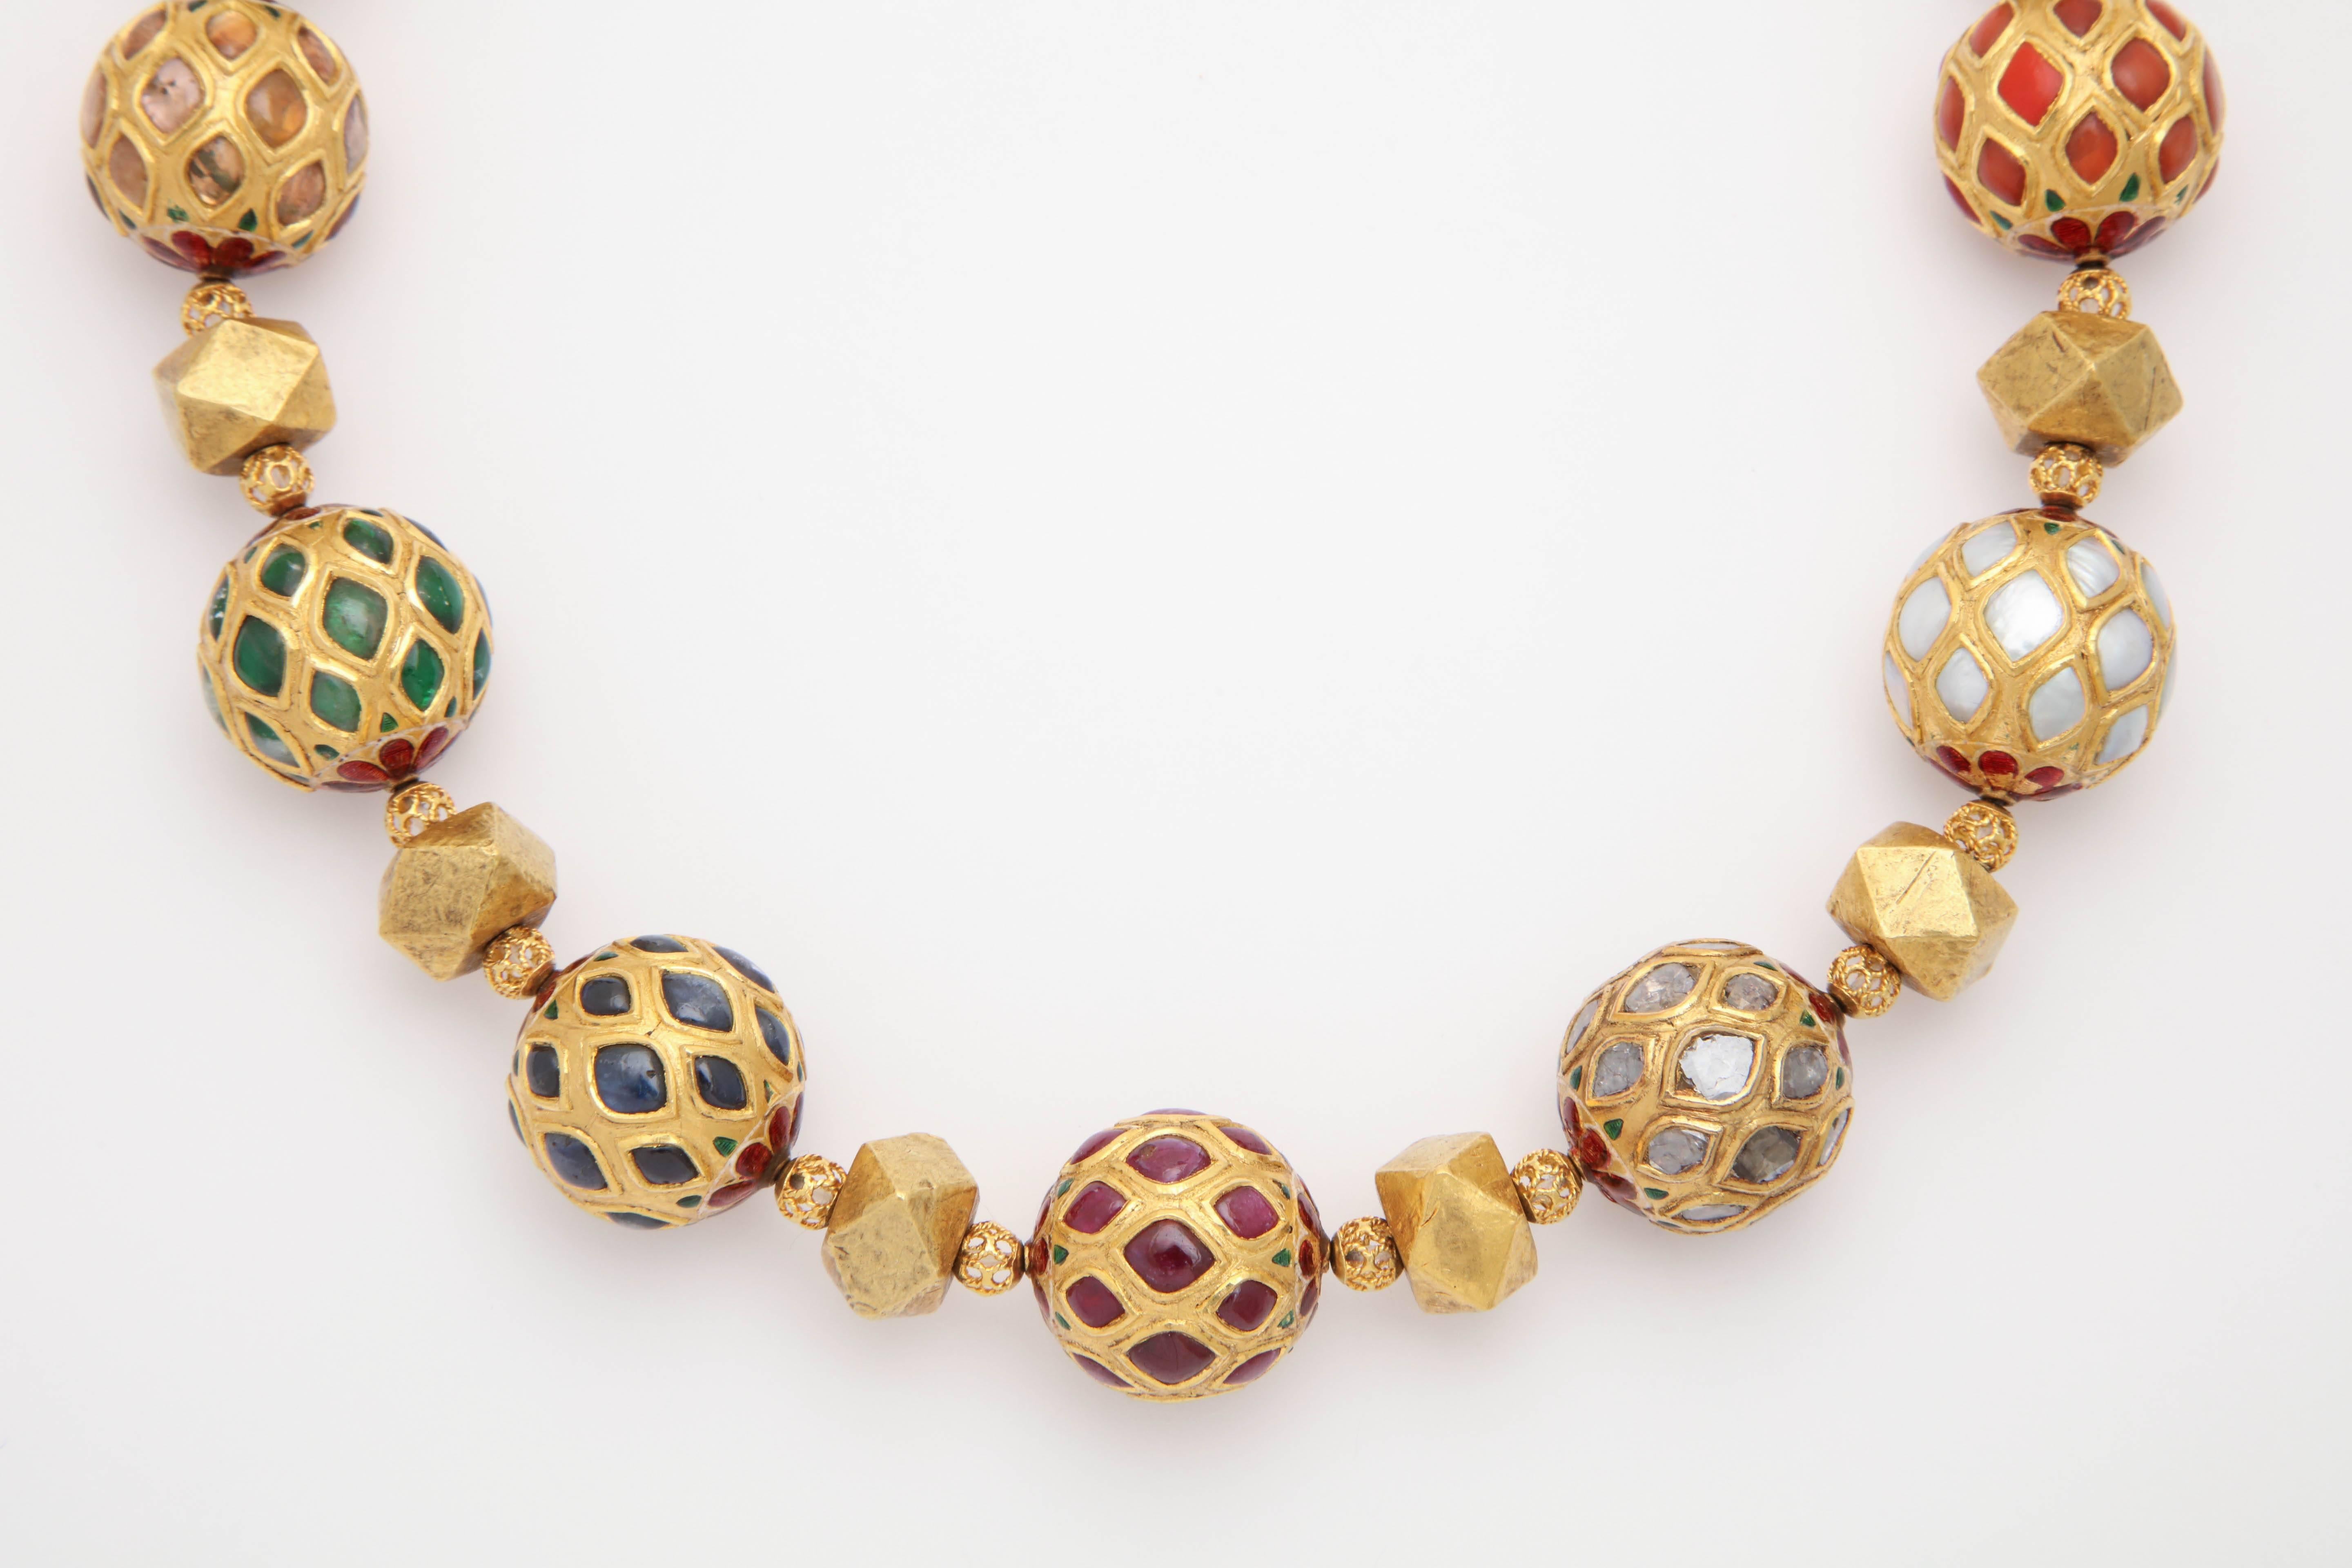 A Contemporary Navratna Kundan Necklace. The necklace is composed of 18 and 22kt yellow gold beads, 9 are multi gem set Kundan beads. The stones used are: , Hyacinth (natural zircon), Coral, Pearl, Diamond,Ruby, Sapphire, Emerald, Topaz and Cat's